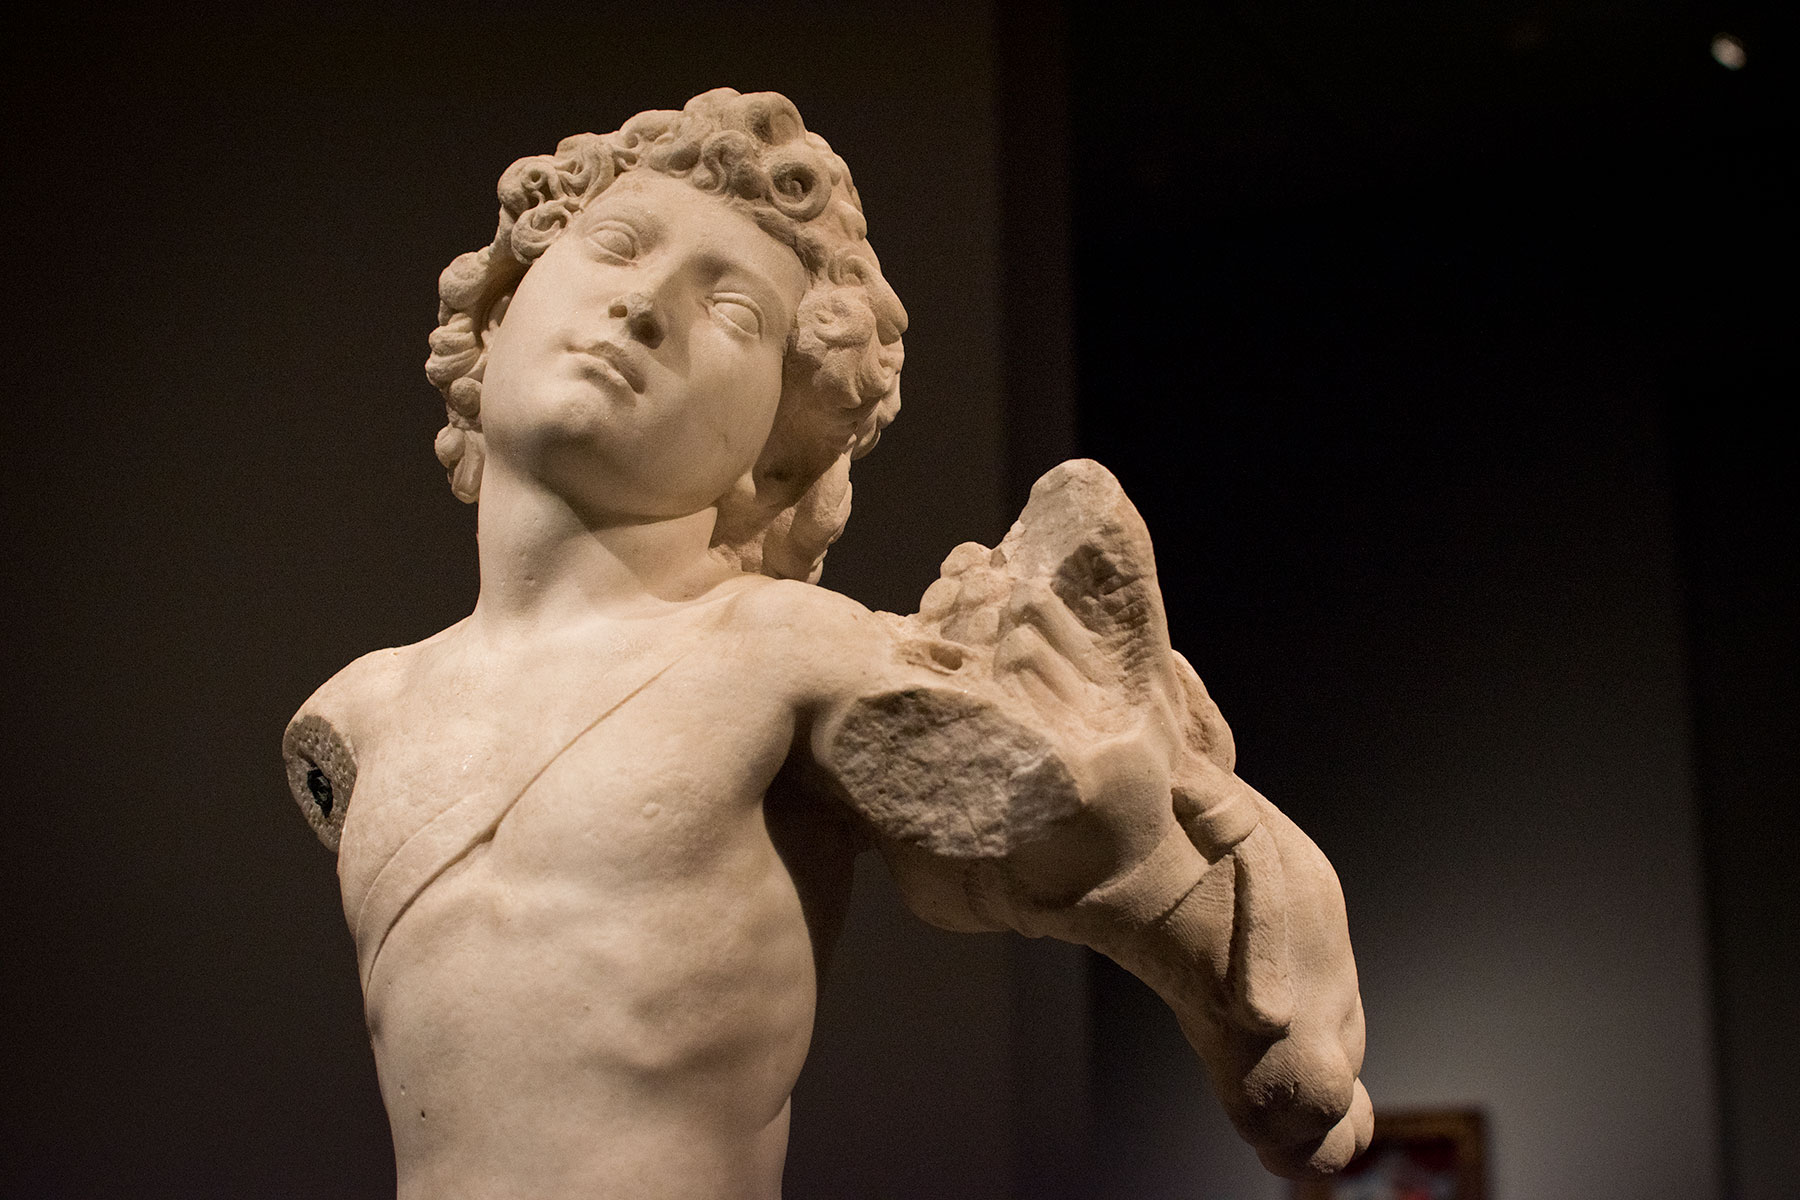 Detail of the Young Archer, by Michelangelo displayed in the exhibit Michelangelo Divine Draftsman and Designer exhibit at the Metropolitan Museum of Art in New York